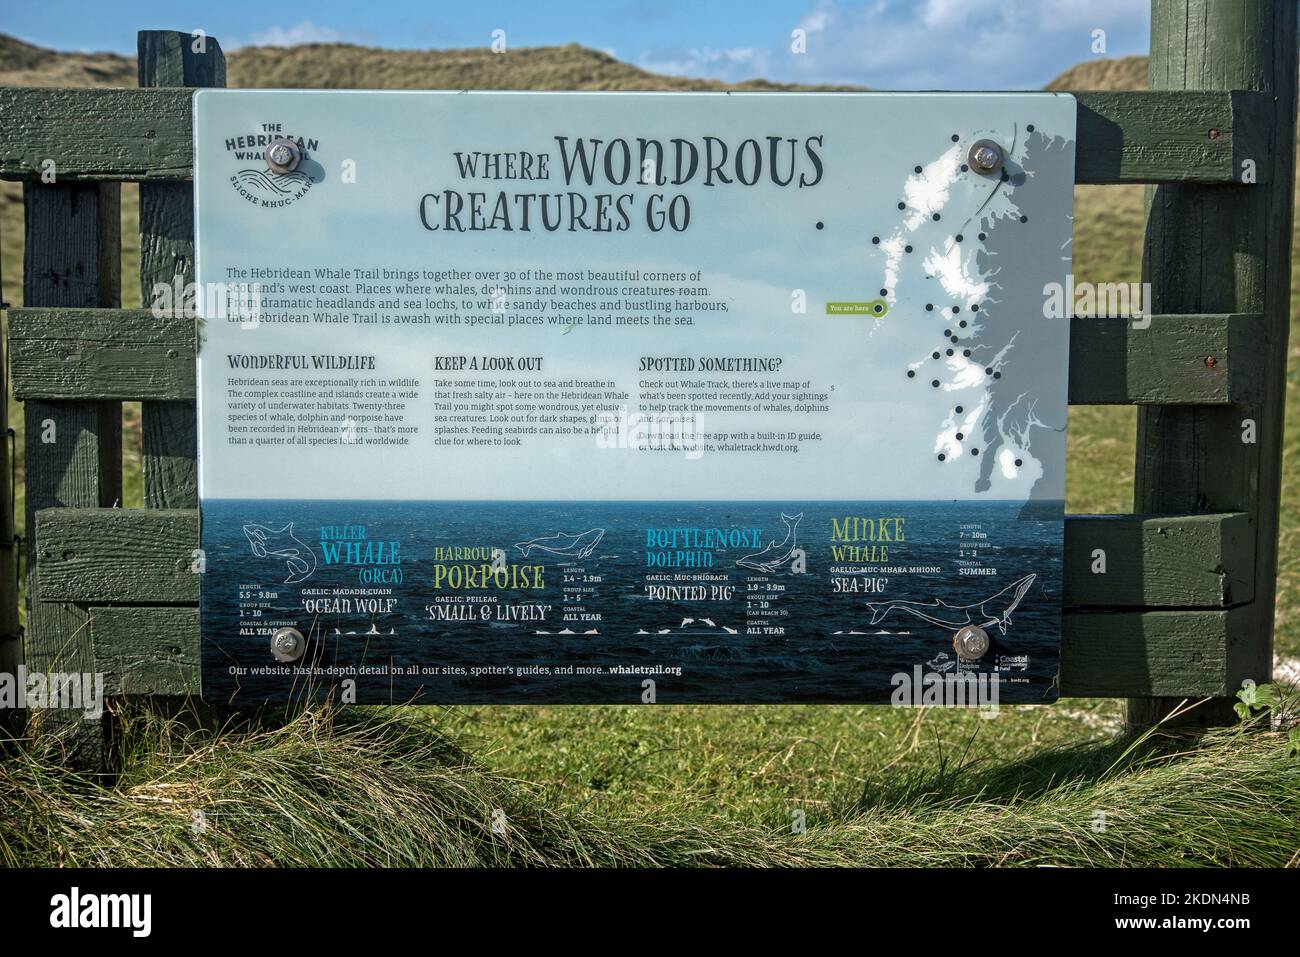 Where Wondrous Creatures Go, an information board  on The Hebridean Whale Trail at Eoligarry on the Isle of Barra, Outer Hebrides, Scotland, UK. Stock Photo